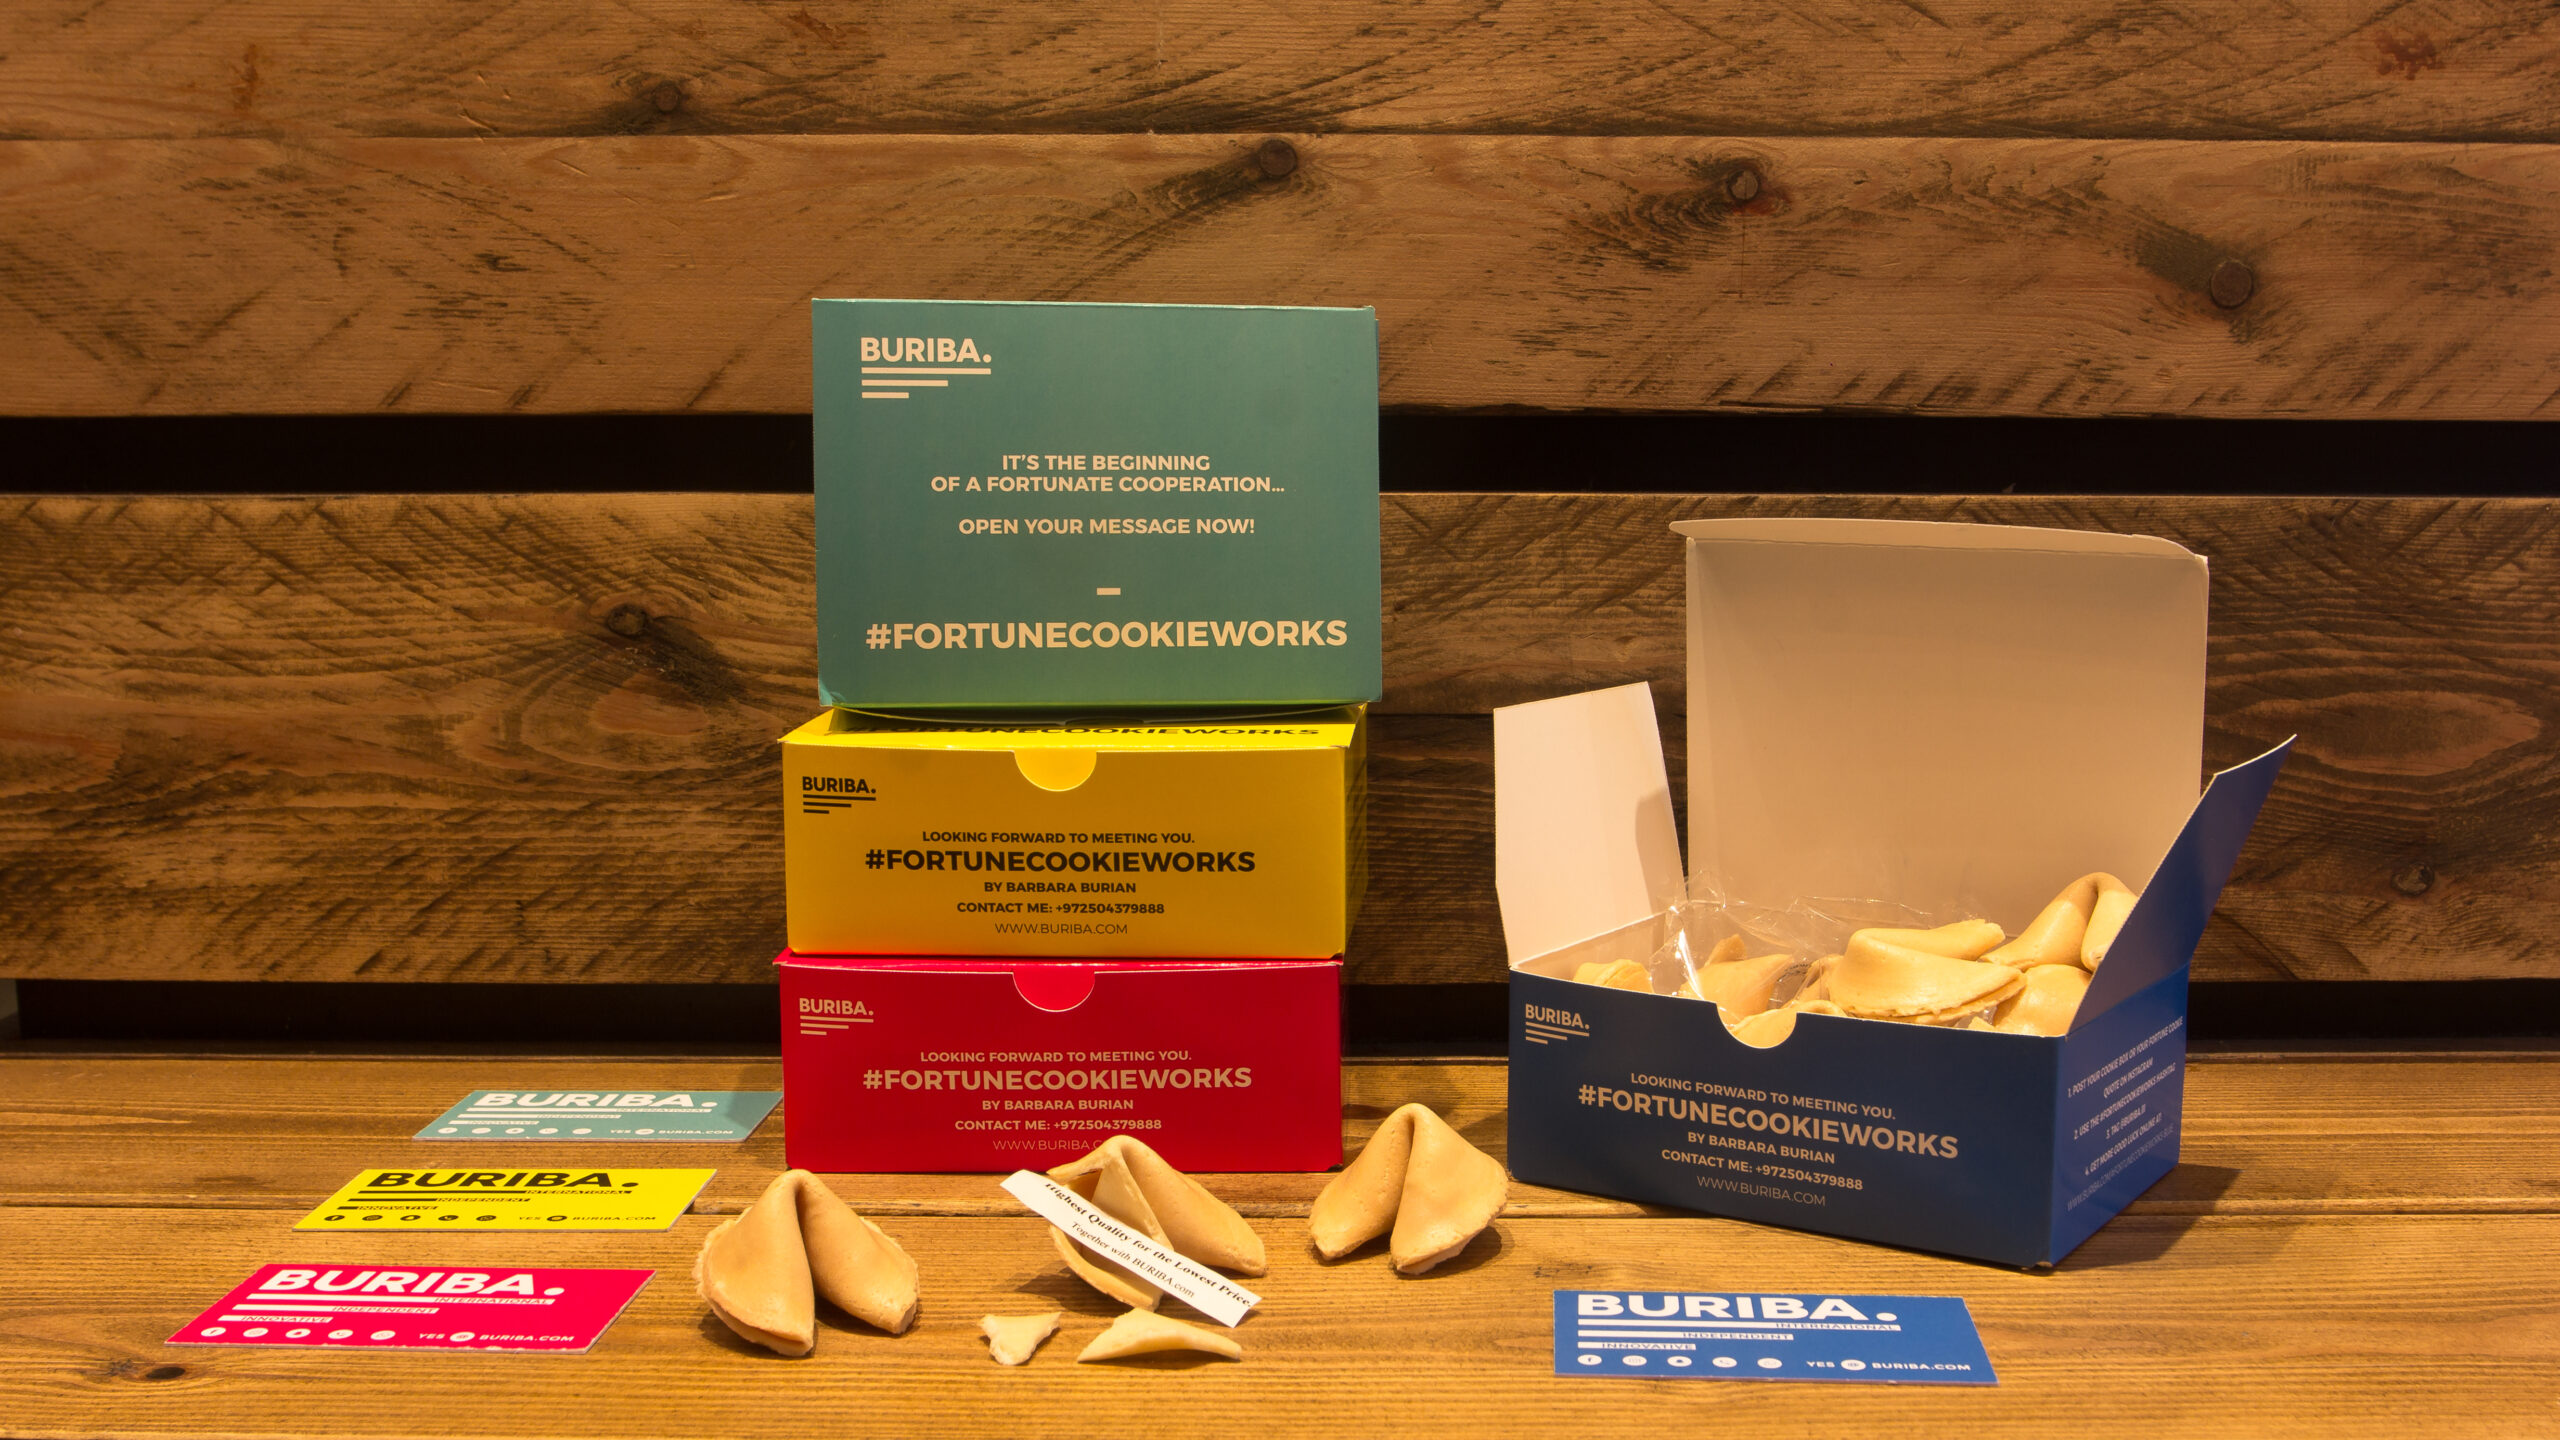 gamified boxes with fortune cookies from buriba